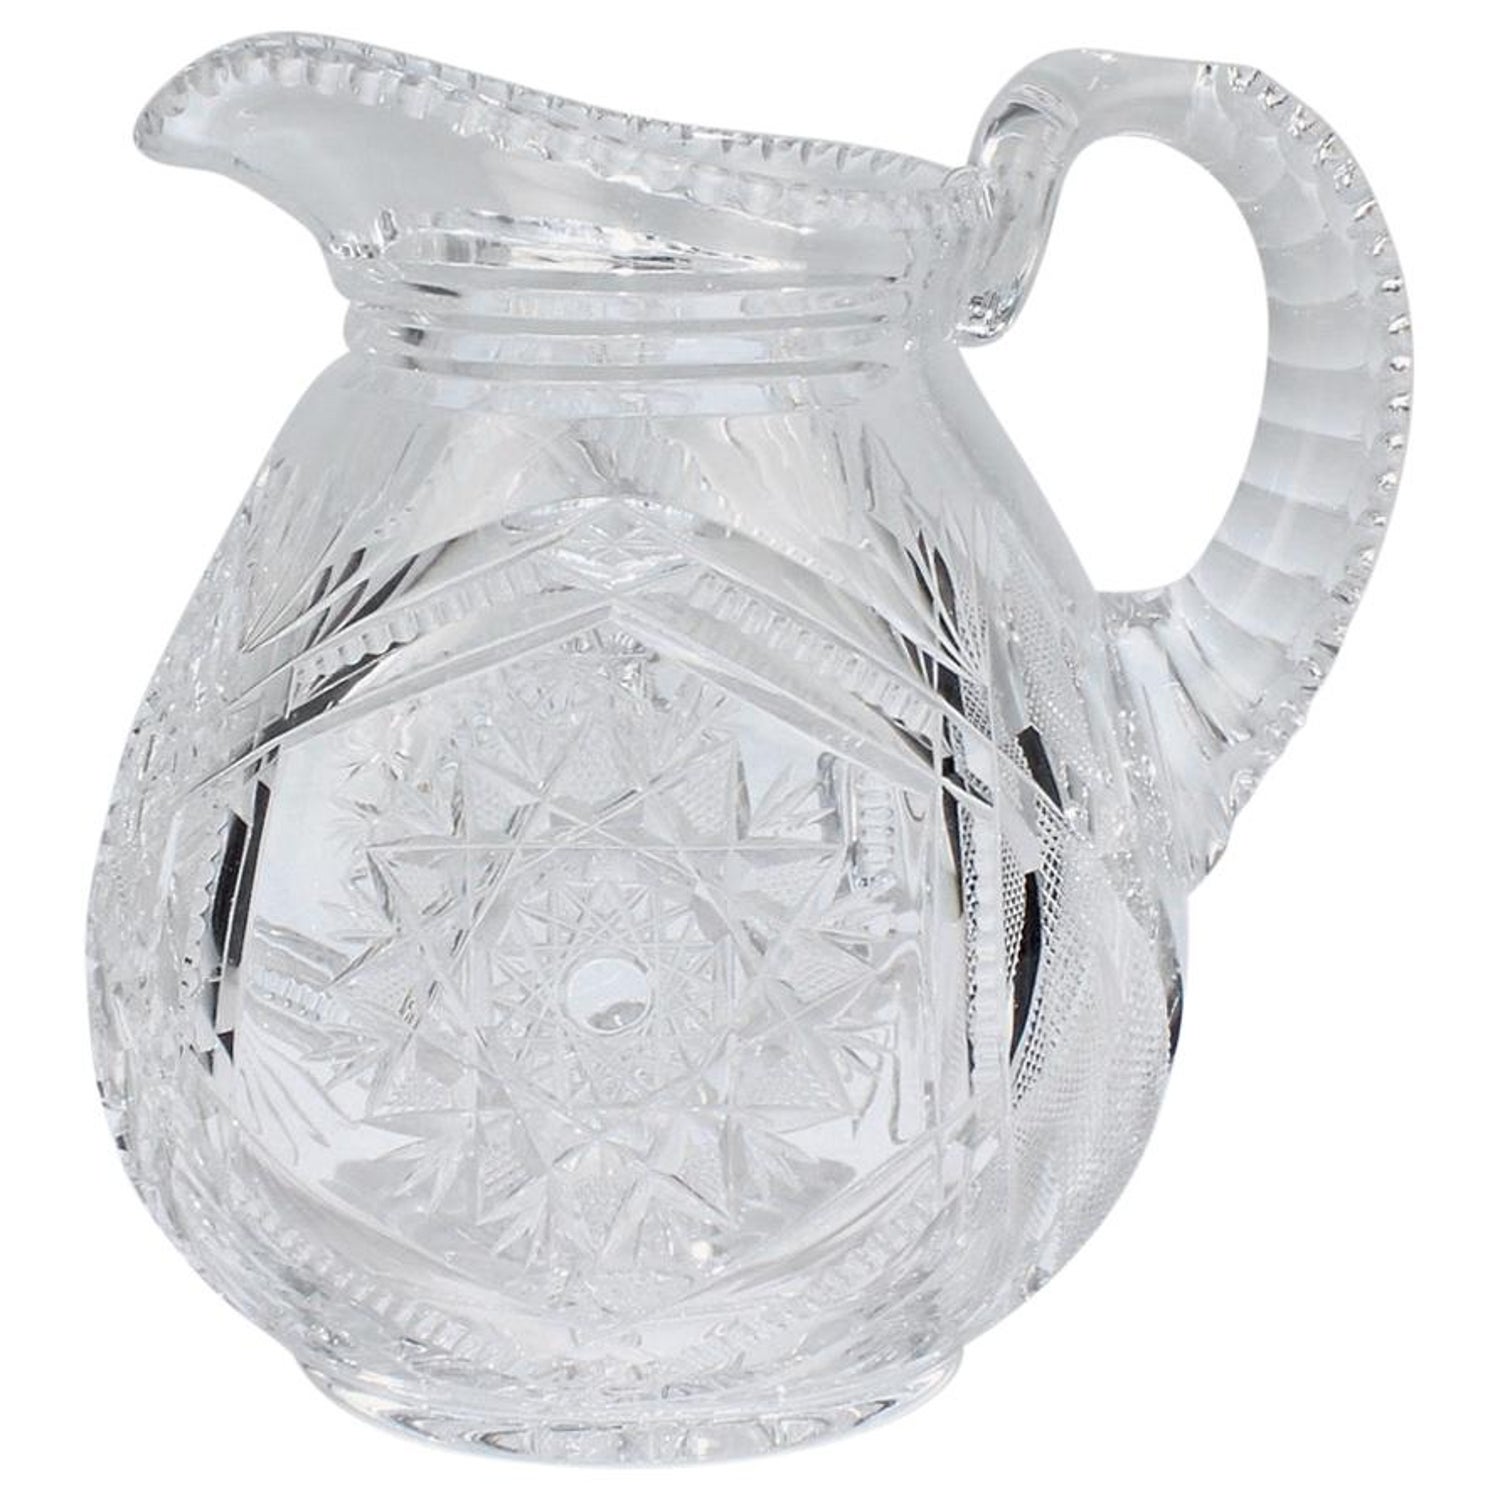 https://a.1stdibscdn.com/fine-vintage-cut-glass-pitcher-with-a-narrow-body-for-sale/1121189/f_152504711565850972131/15250471_master.jpg?width=1500